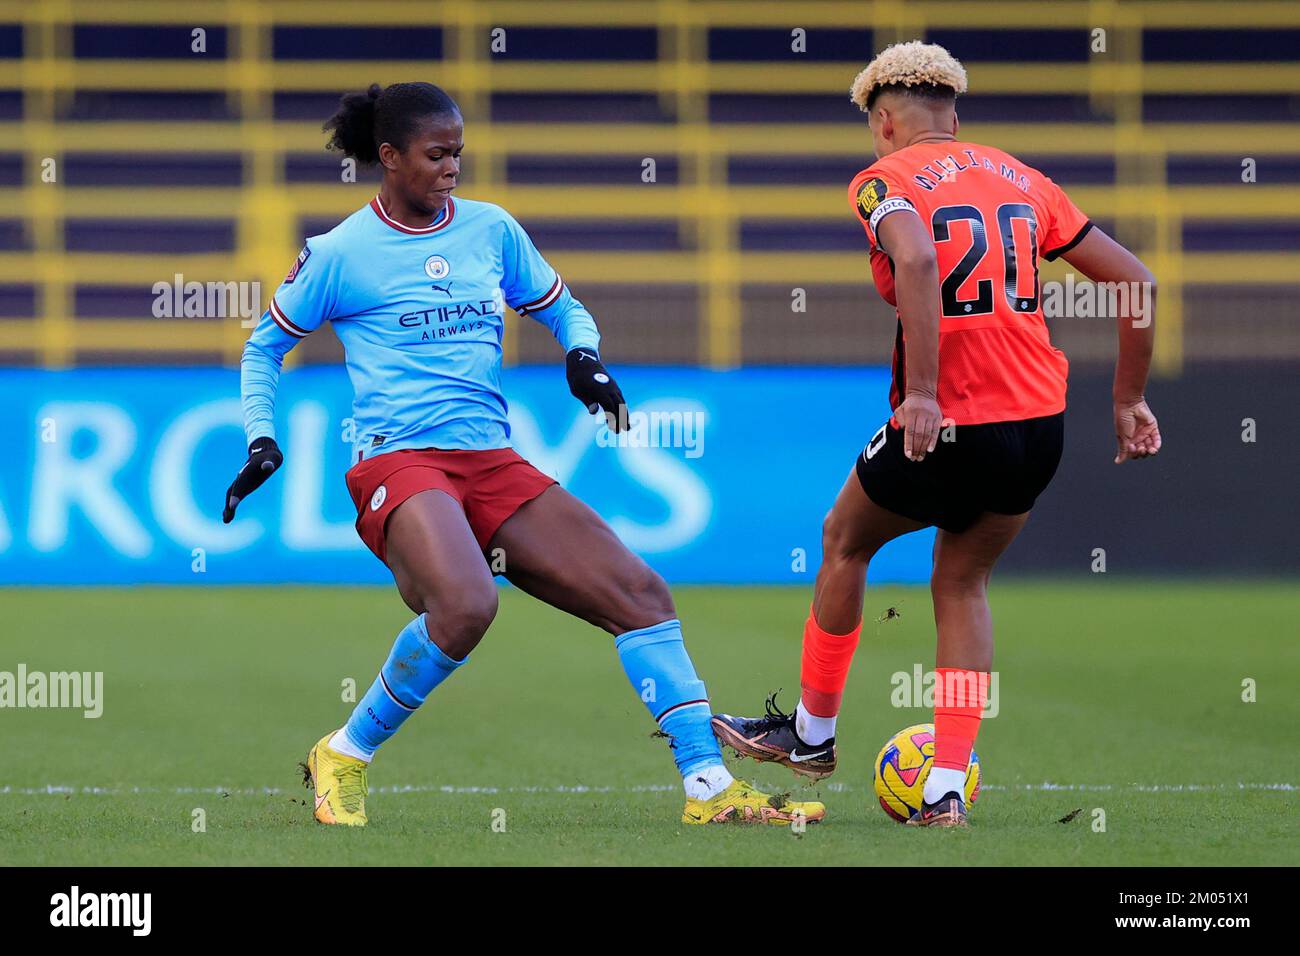 Khadija Shaw #21 of Manchester City and Victoria Williams #20 of Brighton challenge for the ball during The FA Women's Super League match Manchester City Women vs Brighton & Hove Albion W.F.C. at Etihad Campus, Manchester, United Kingdom, 4th December 2022  (Photo by Conor Molloy/News Images) Stock Photo